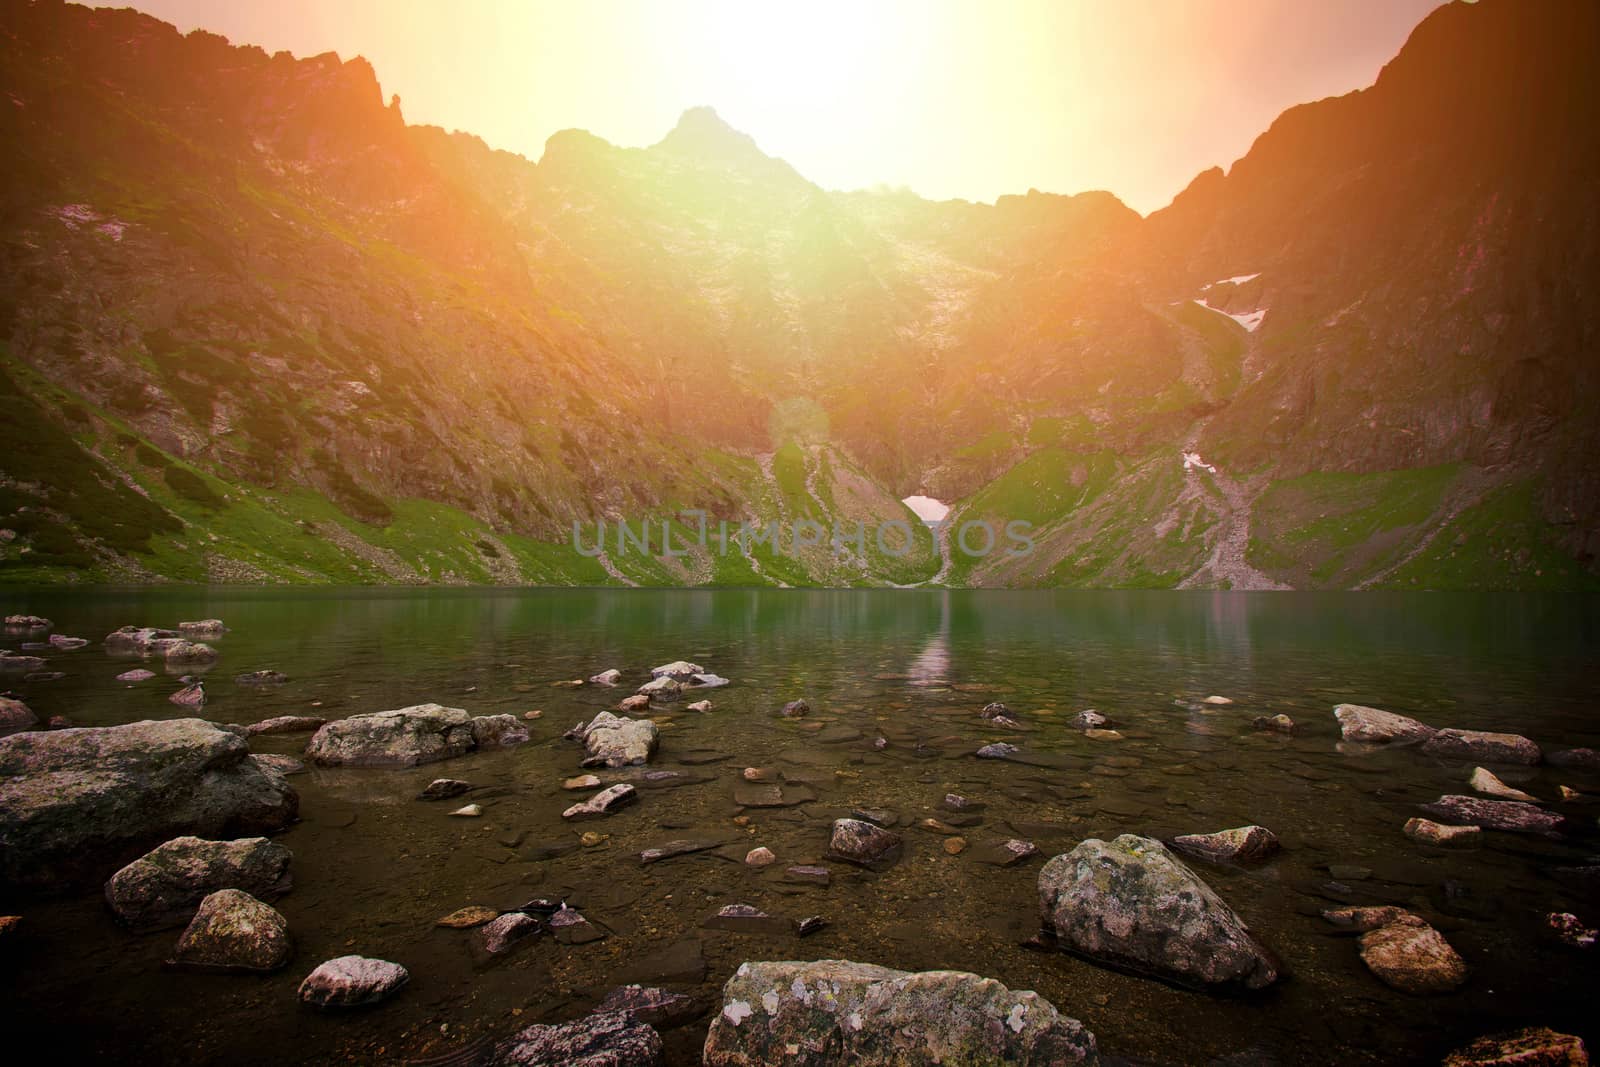 Sunset over lake in mountains. Nature concept.